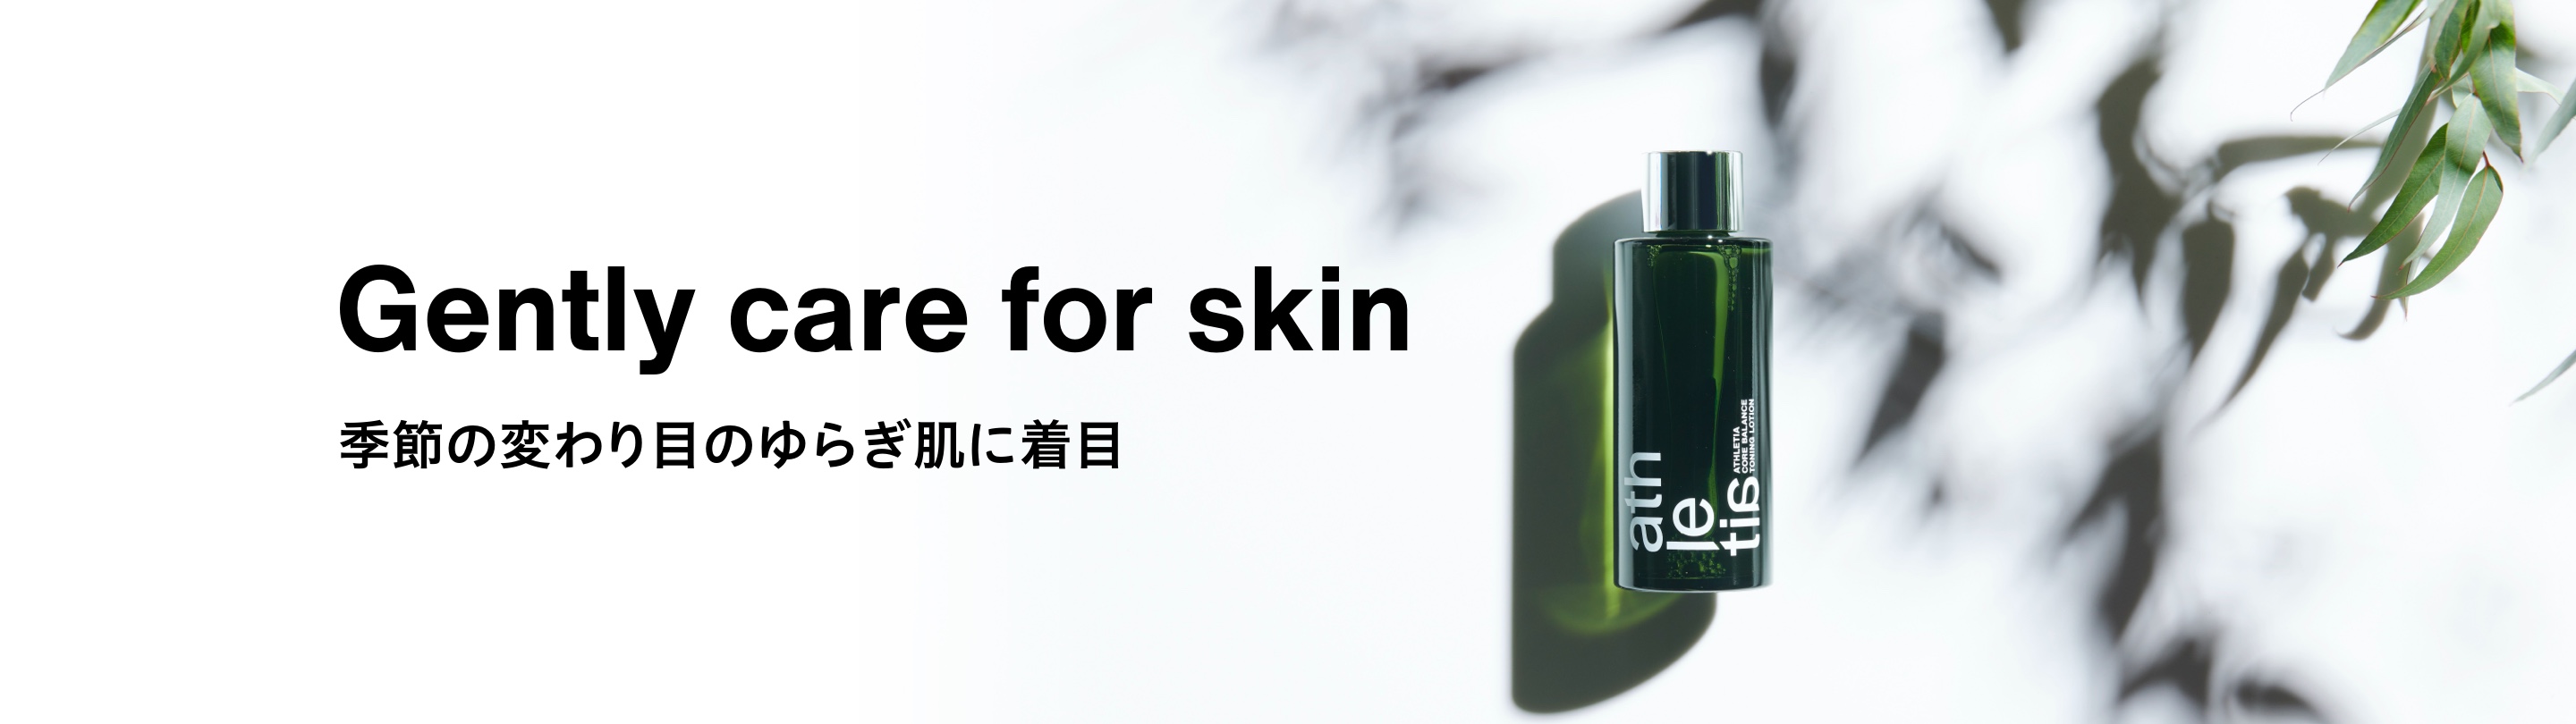 Gently care for spring skin 春先のゆらぎ肌に着目